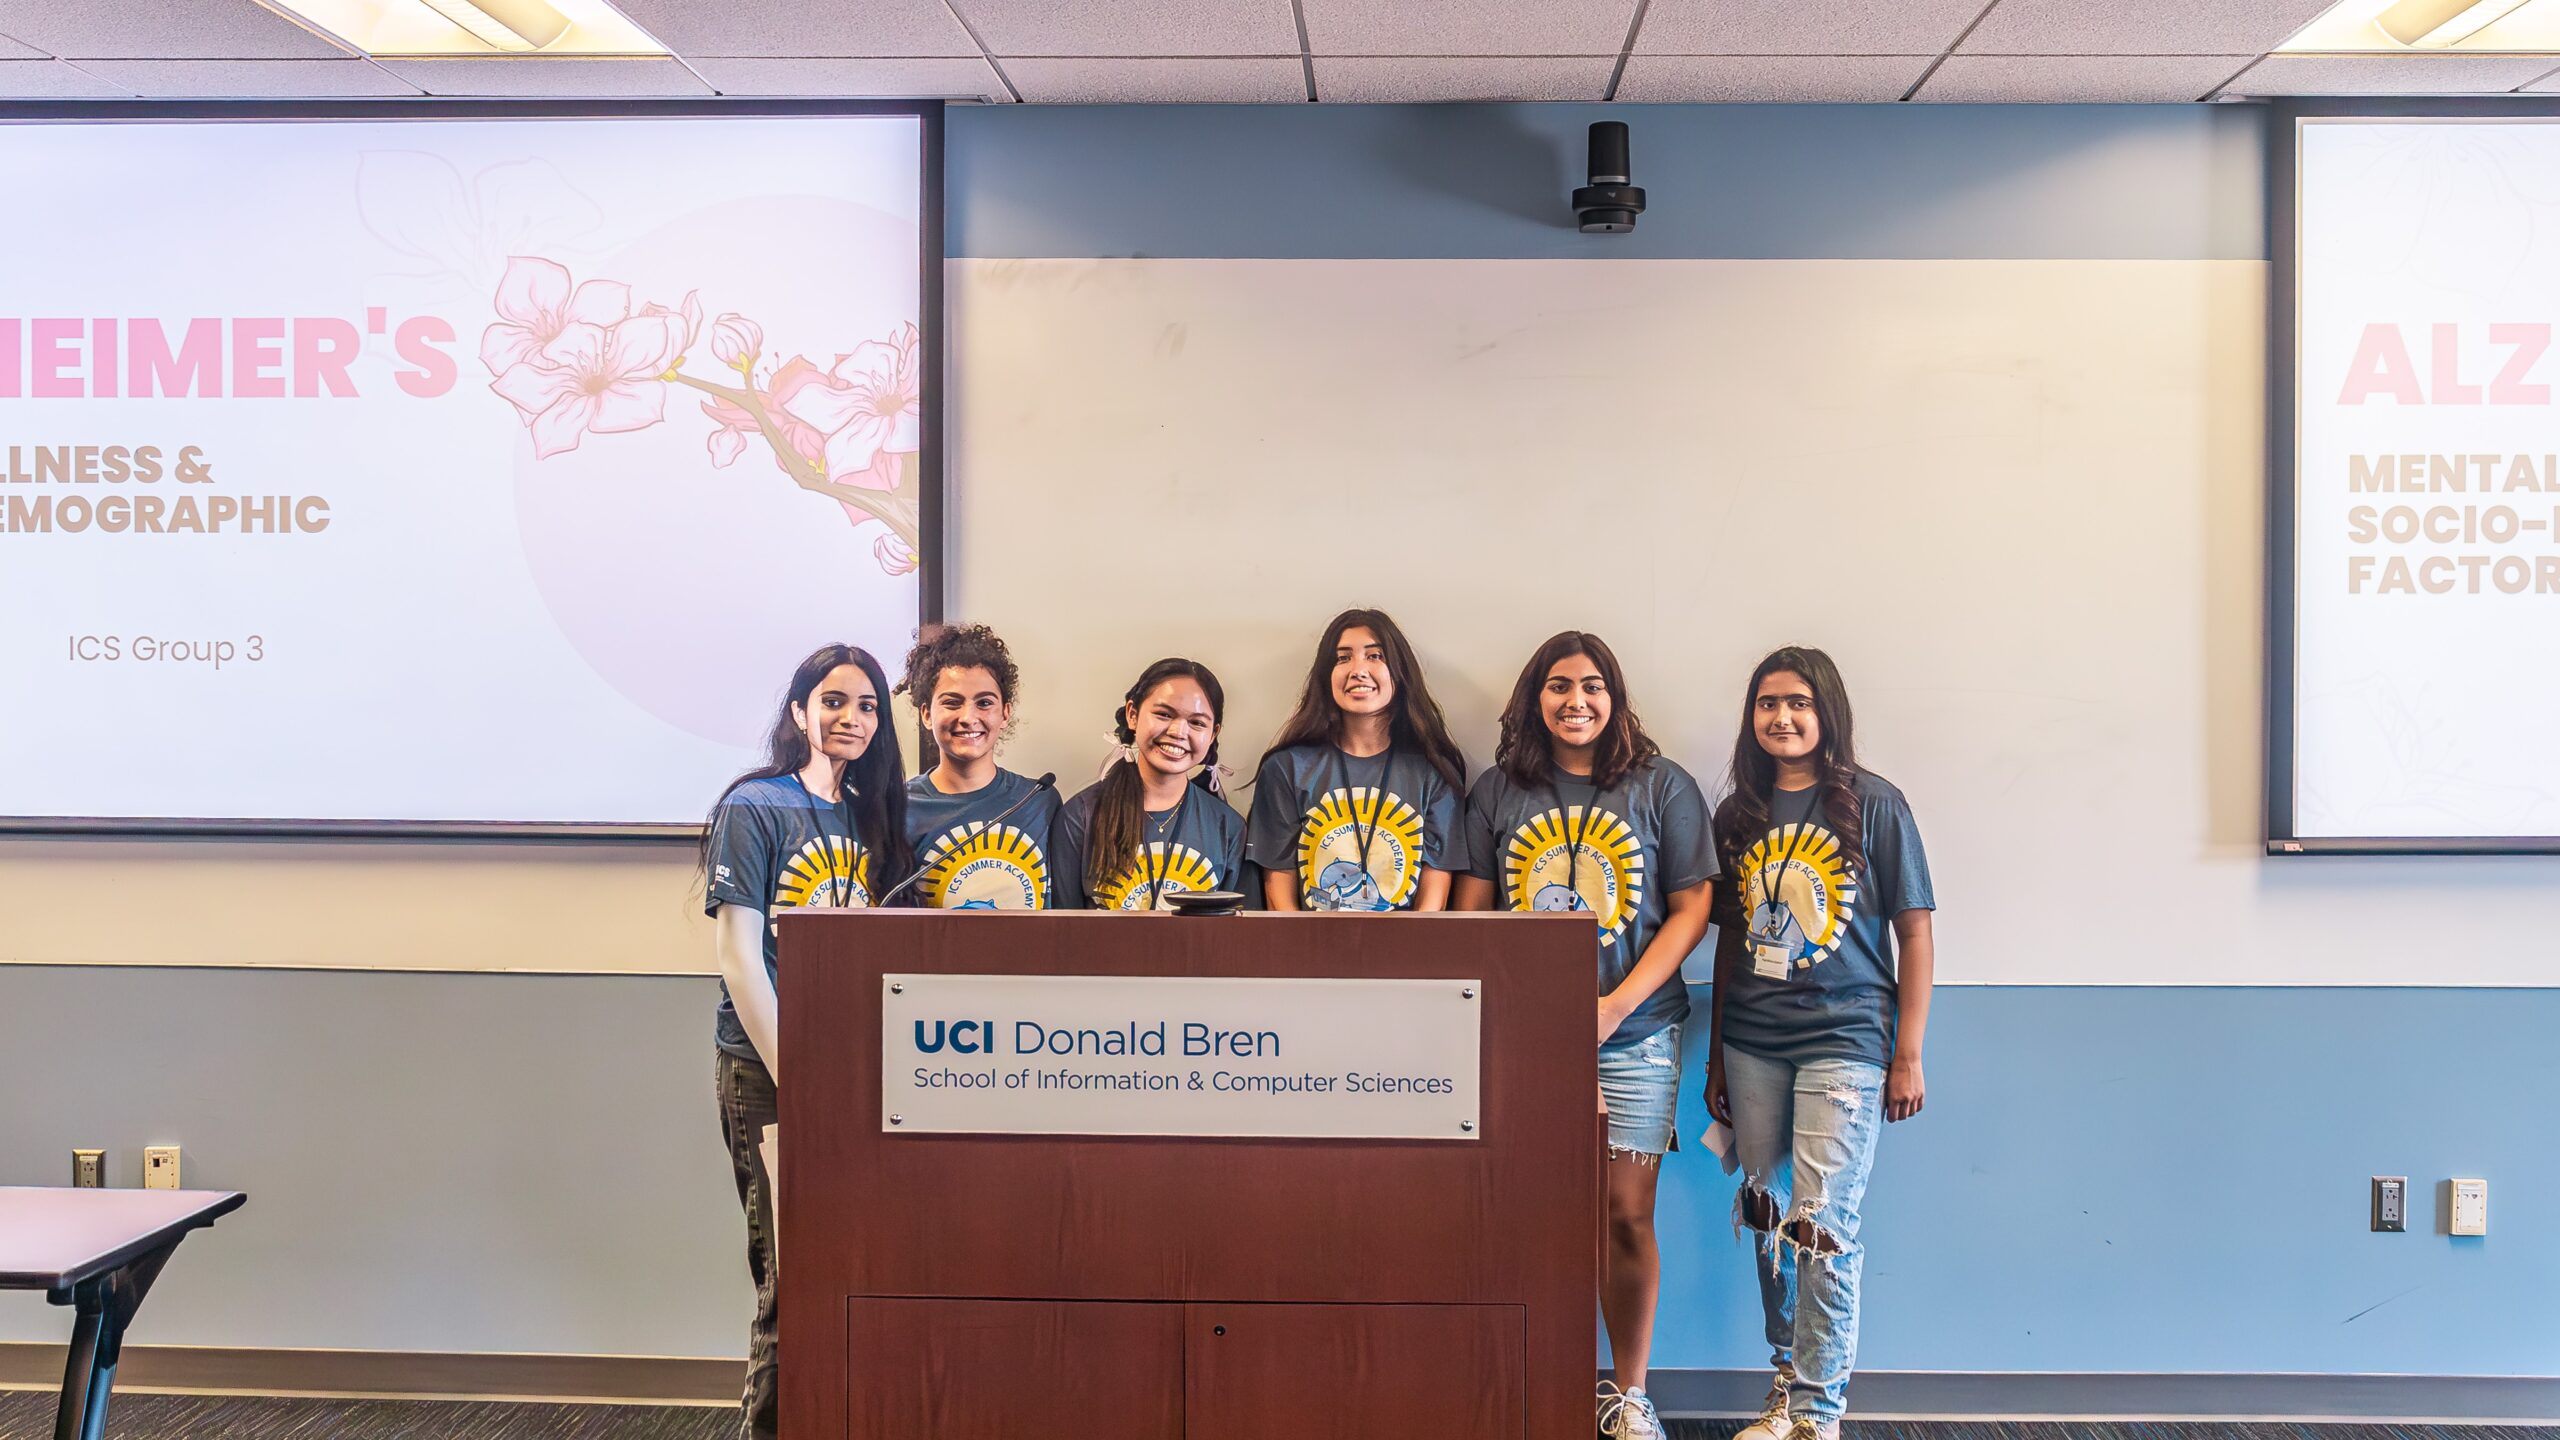 A group of six girls stand behind a podium with their presentation on two screens behind them.